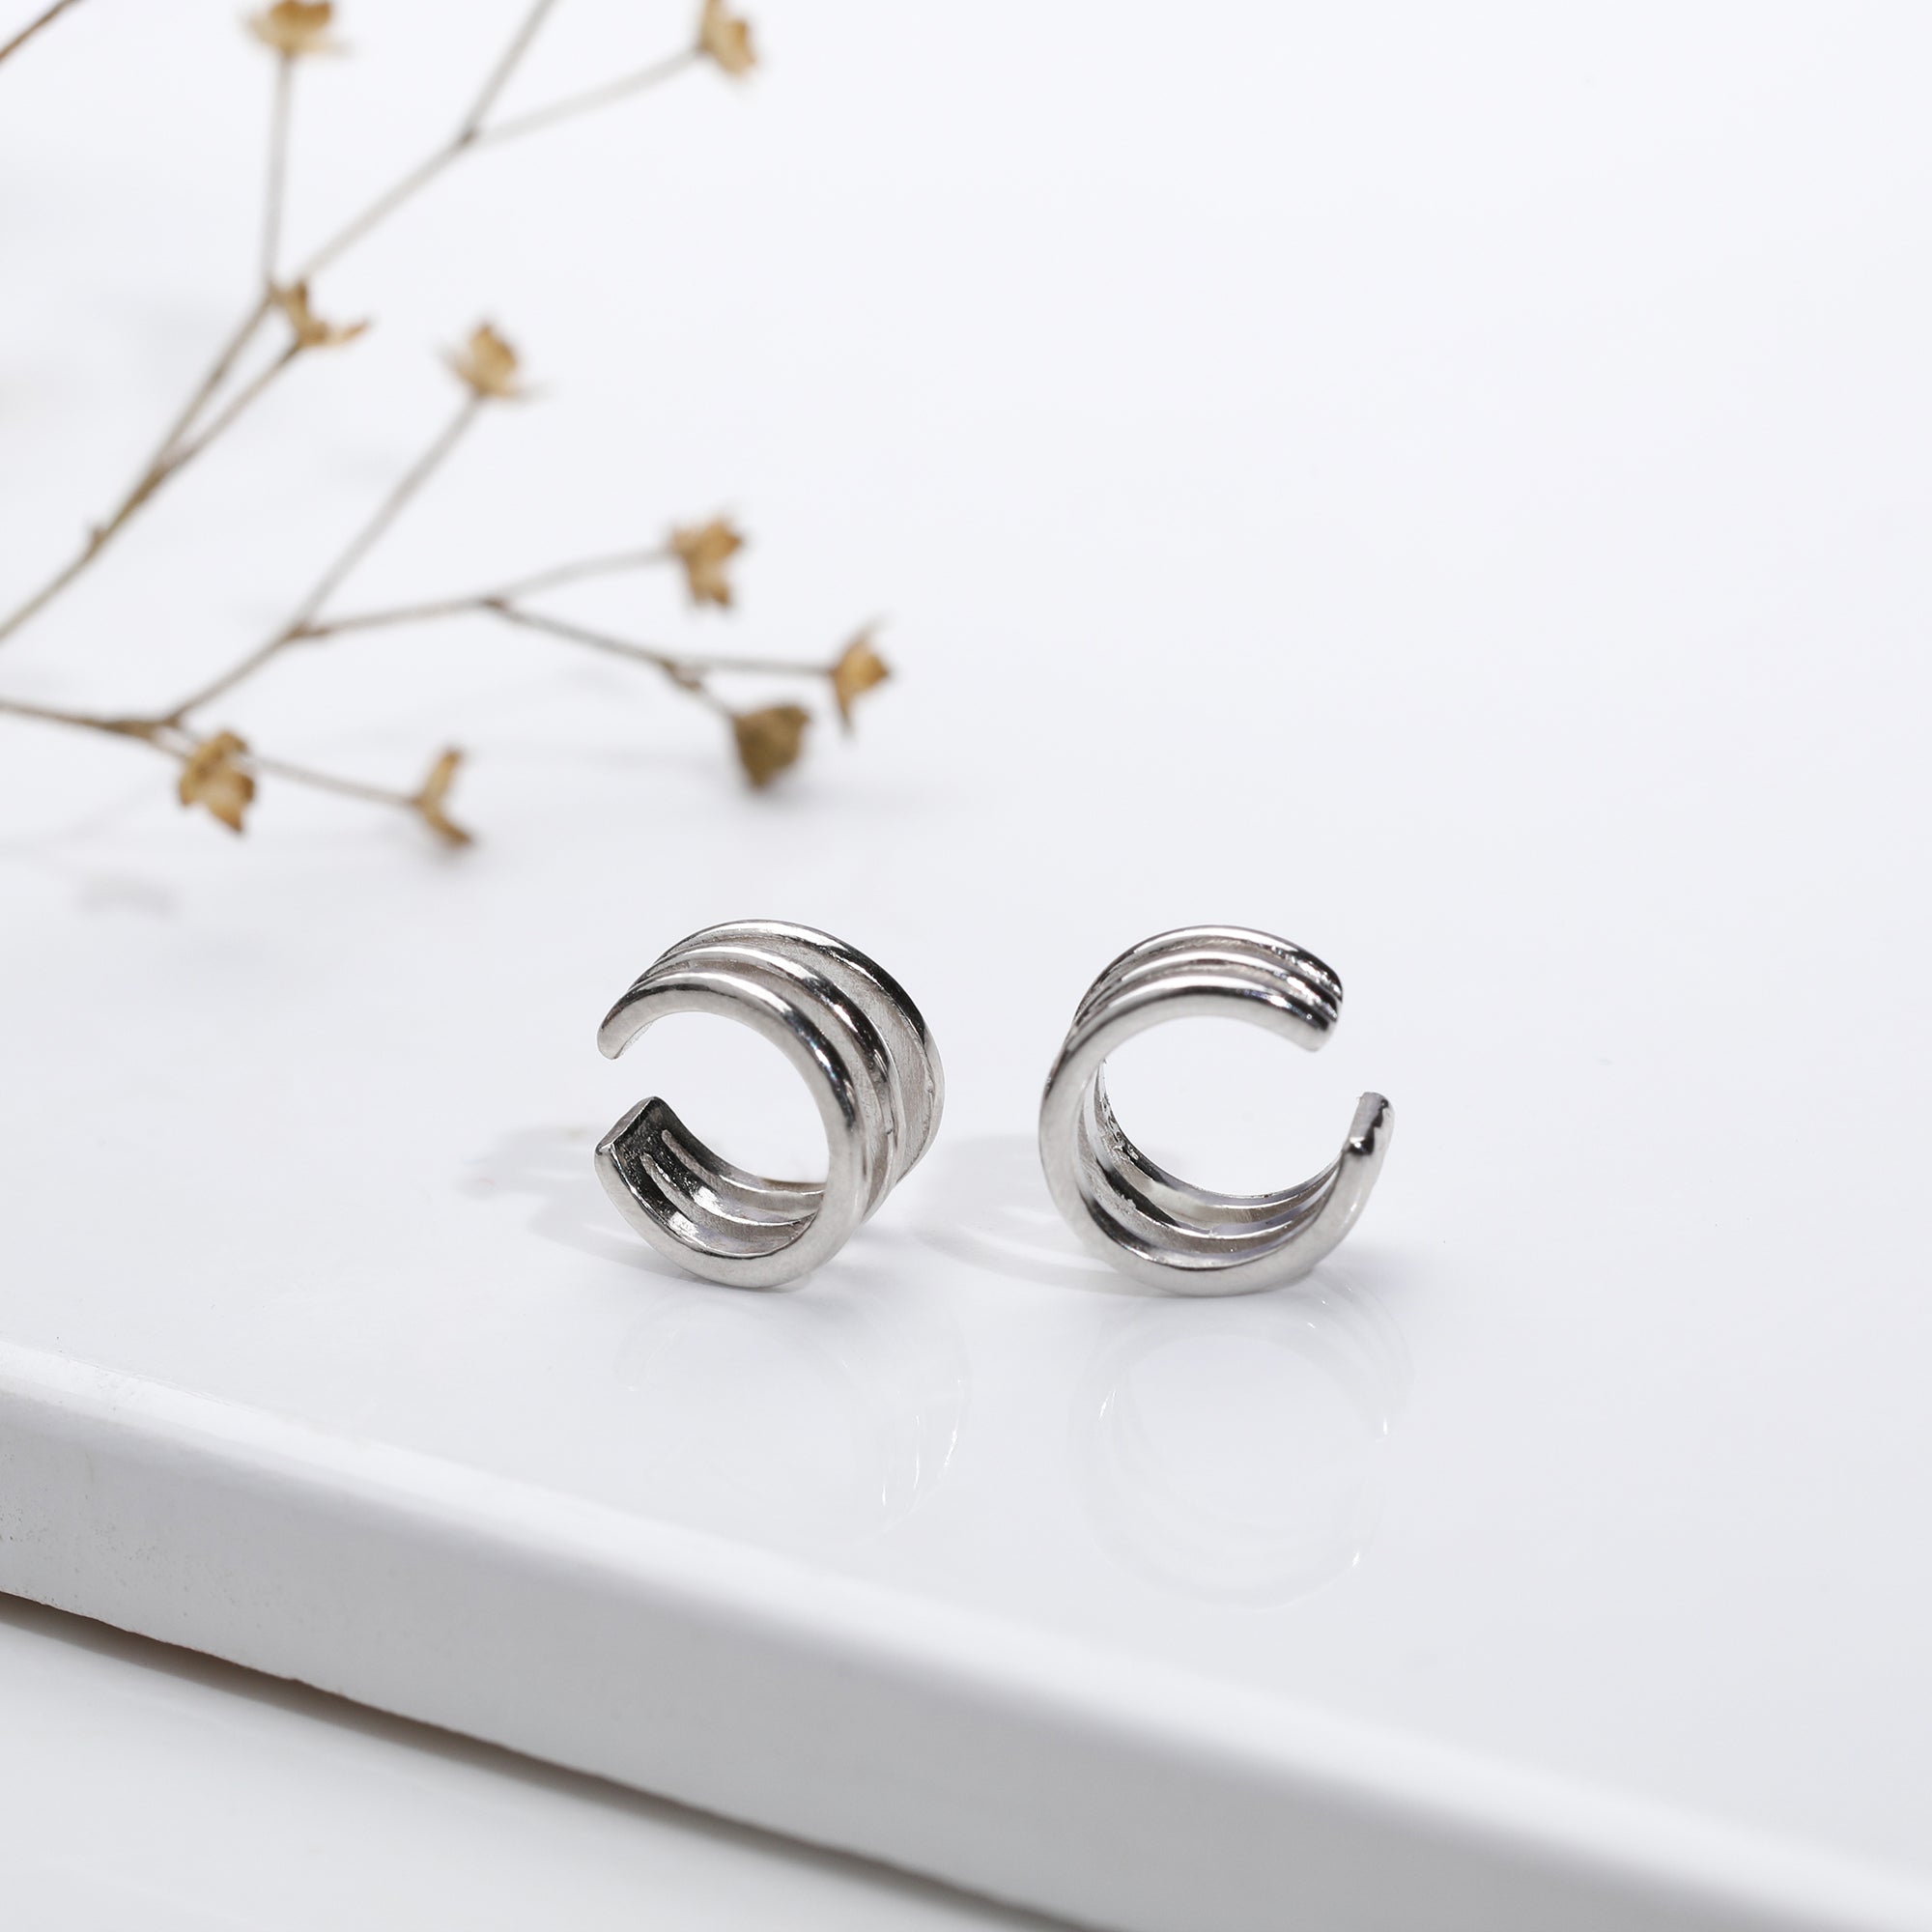 Buy Sterling Silver Small Hoop Earrings, Small Bold Hoop Earrings, Silver  Ring Earrings, Thick Hoop Earrings, Tiny Hoop Earrings, Simple Hoops Online  in India - Etsy